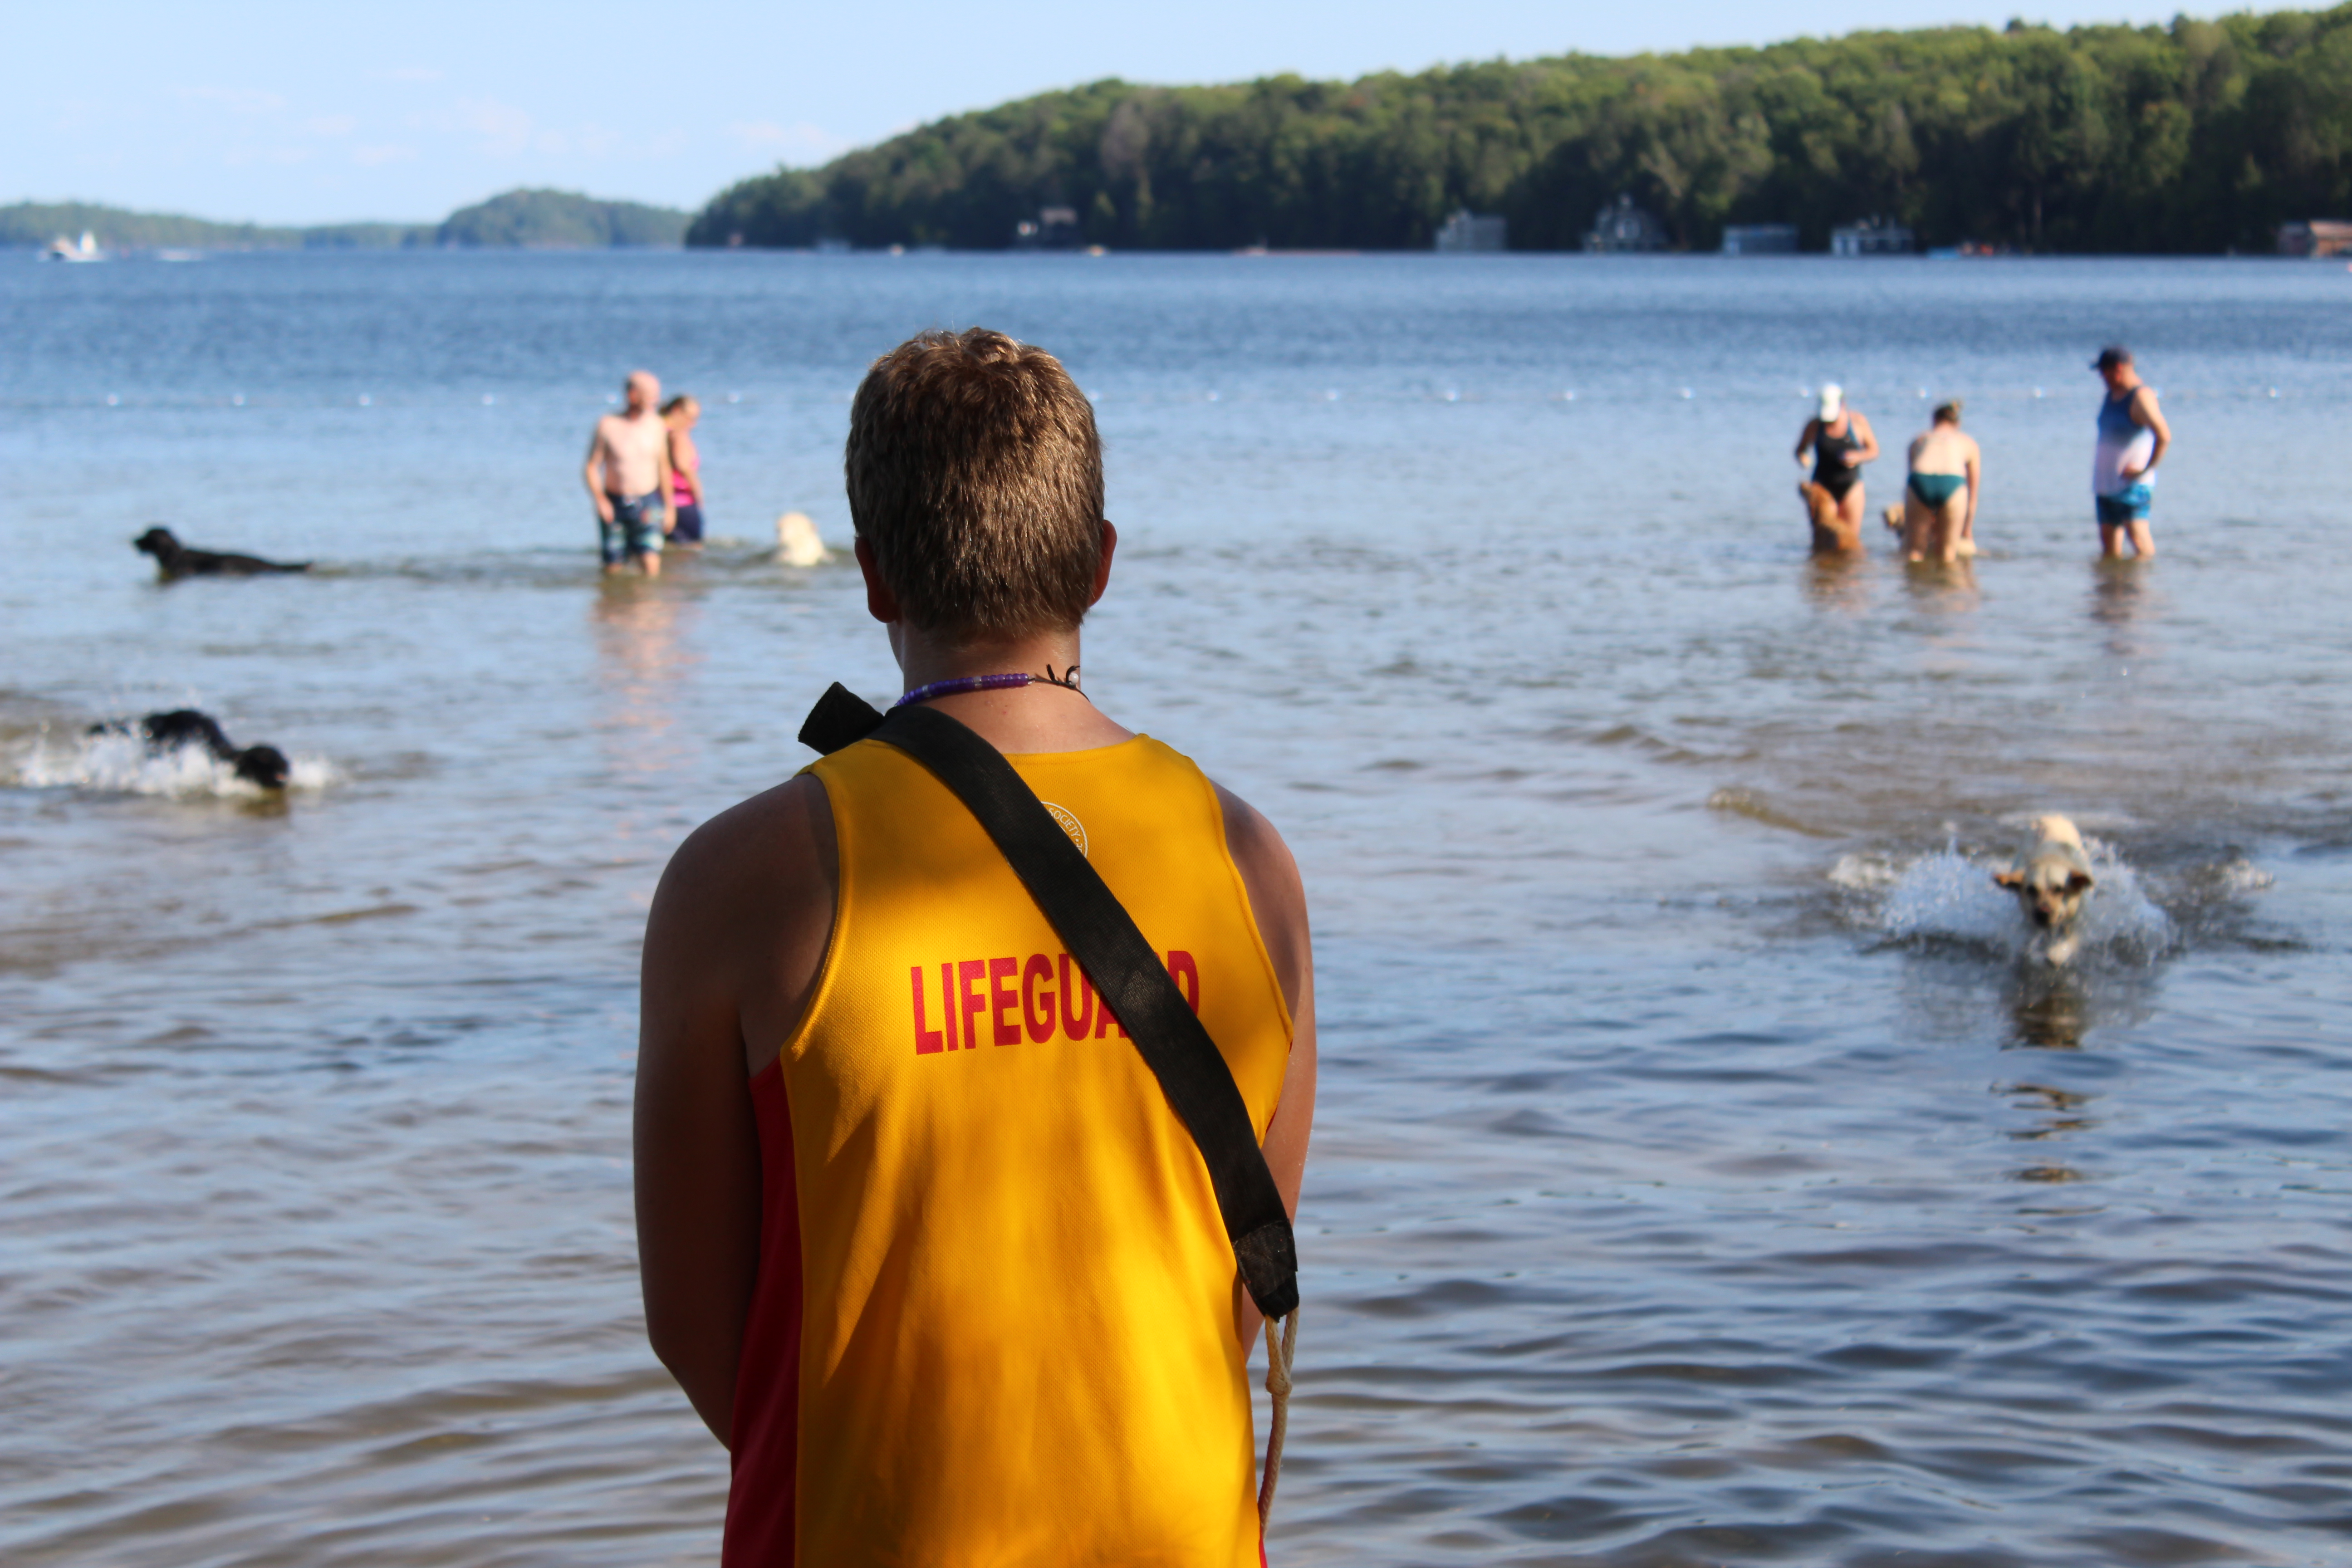 An image of a lifeguard standing infront of the lake